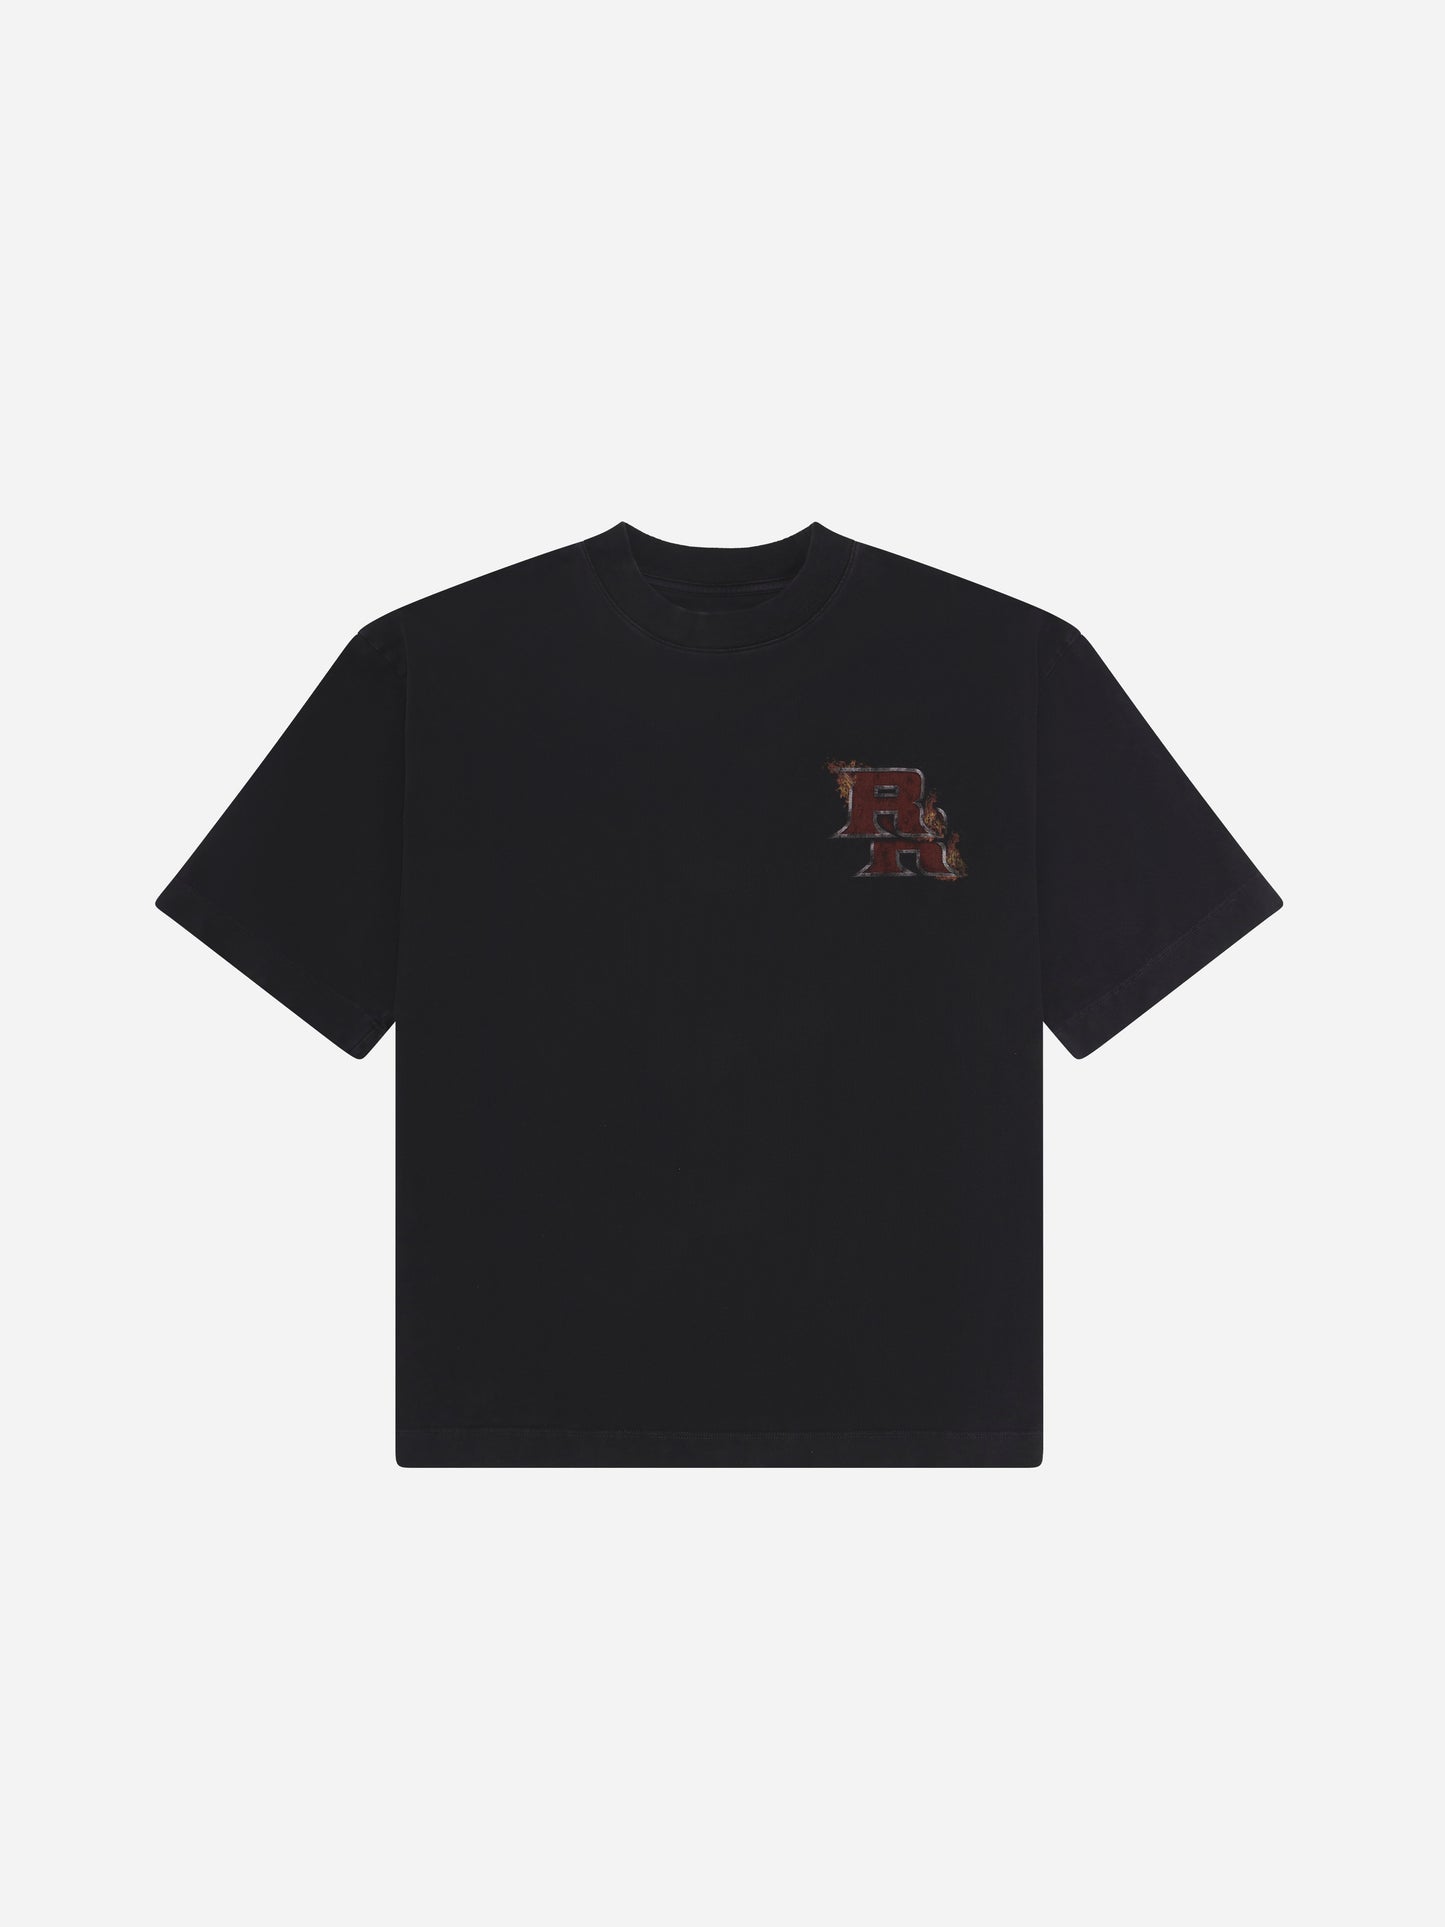 Heavy cotton series t-shirt - washed black